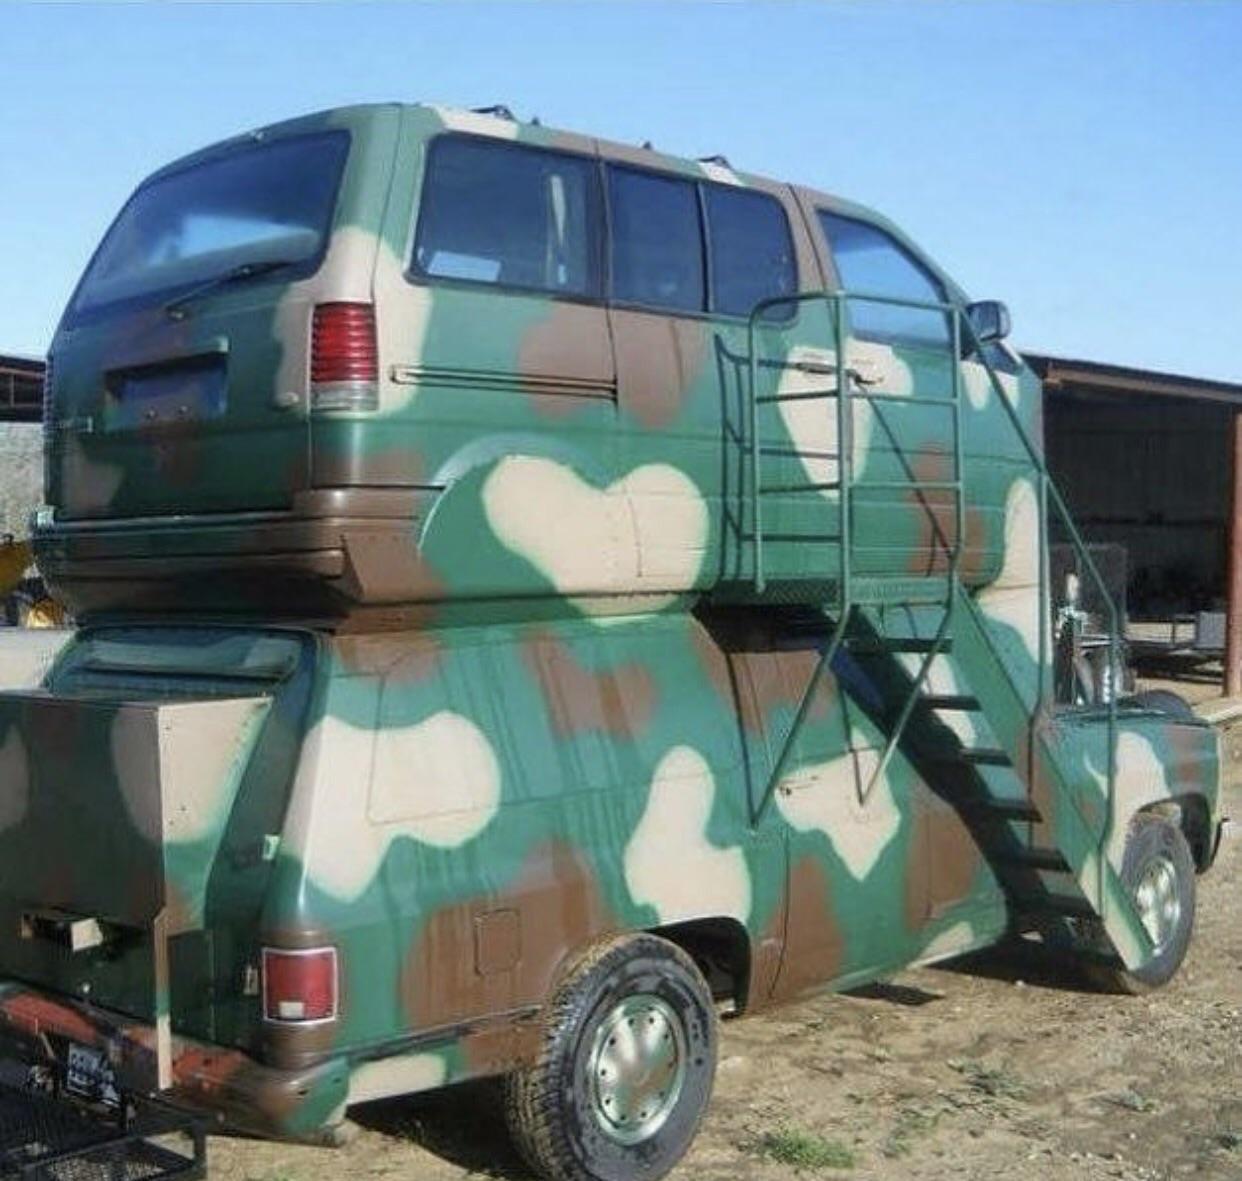 Most Unconventional Camper Vehicles 